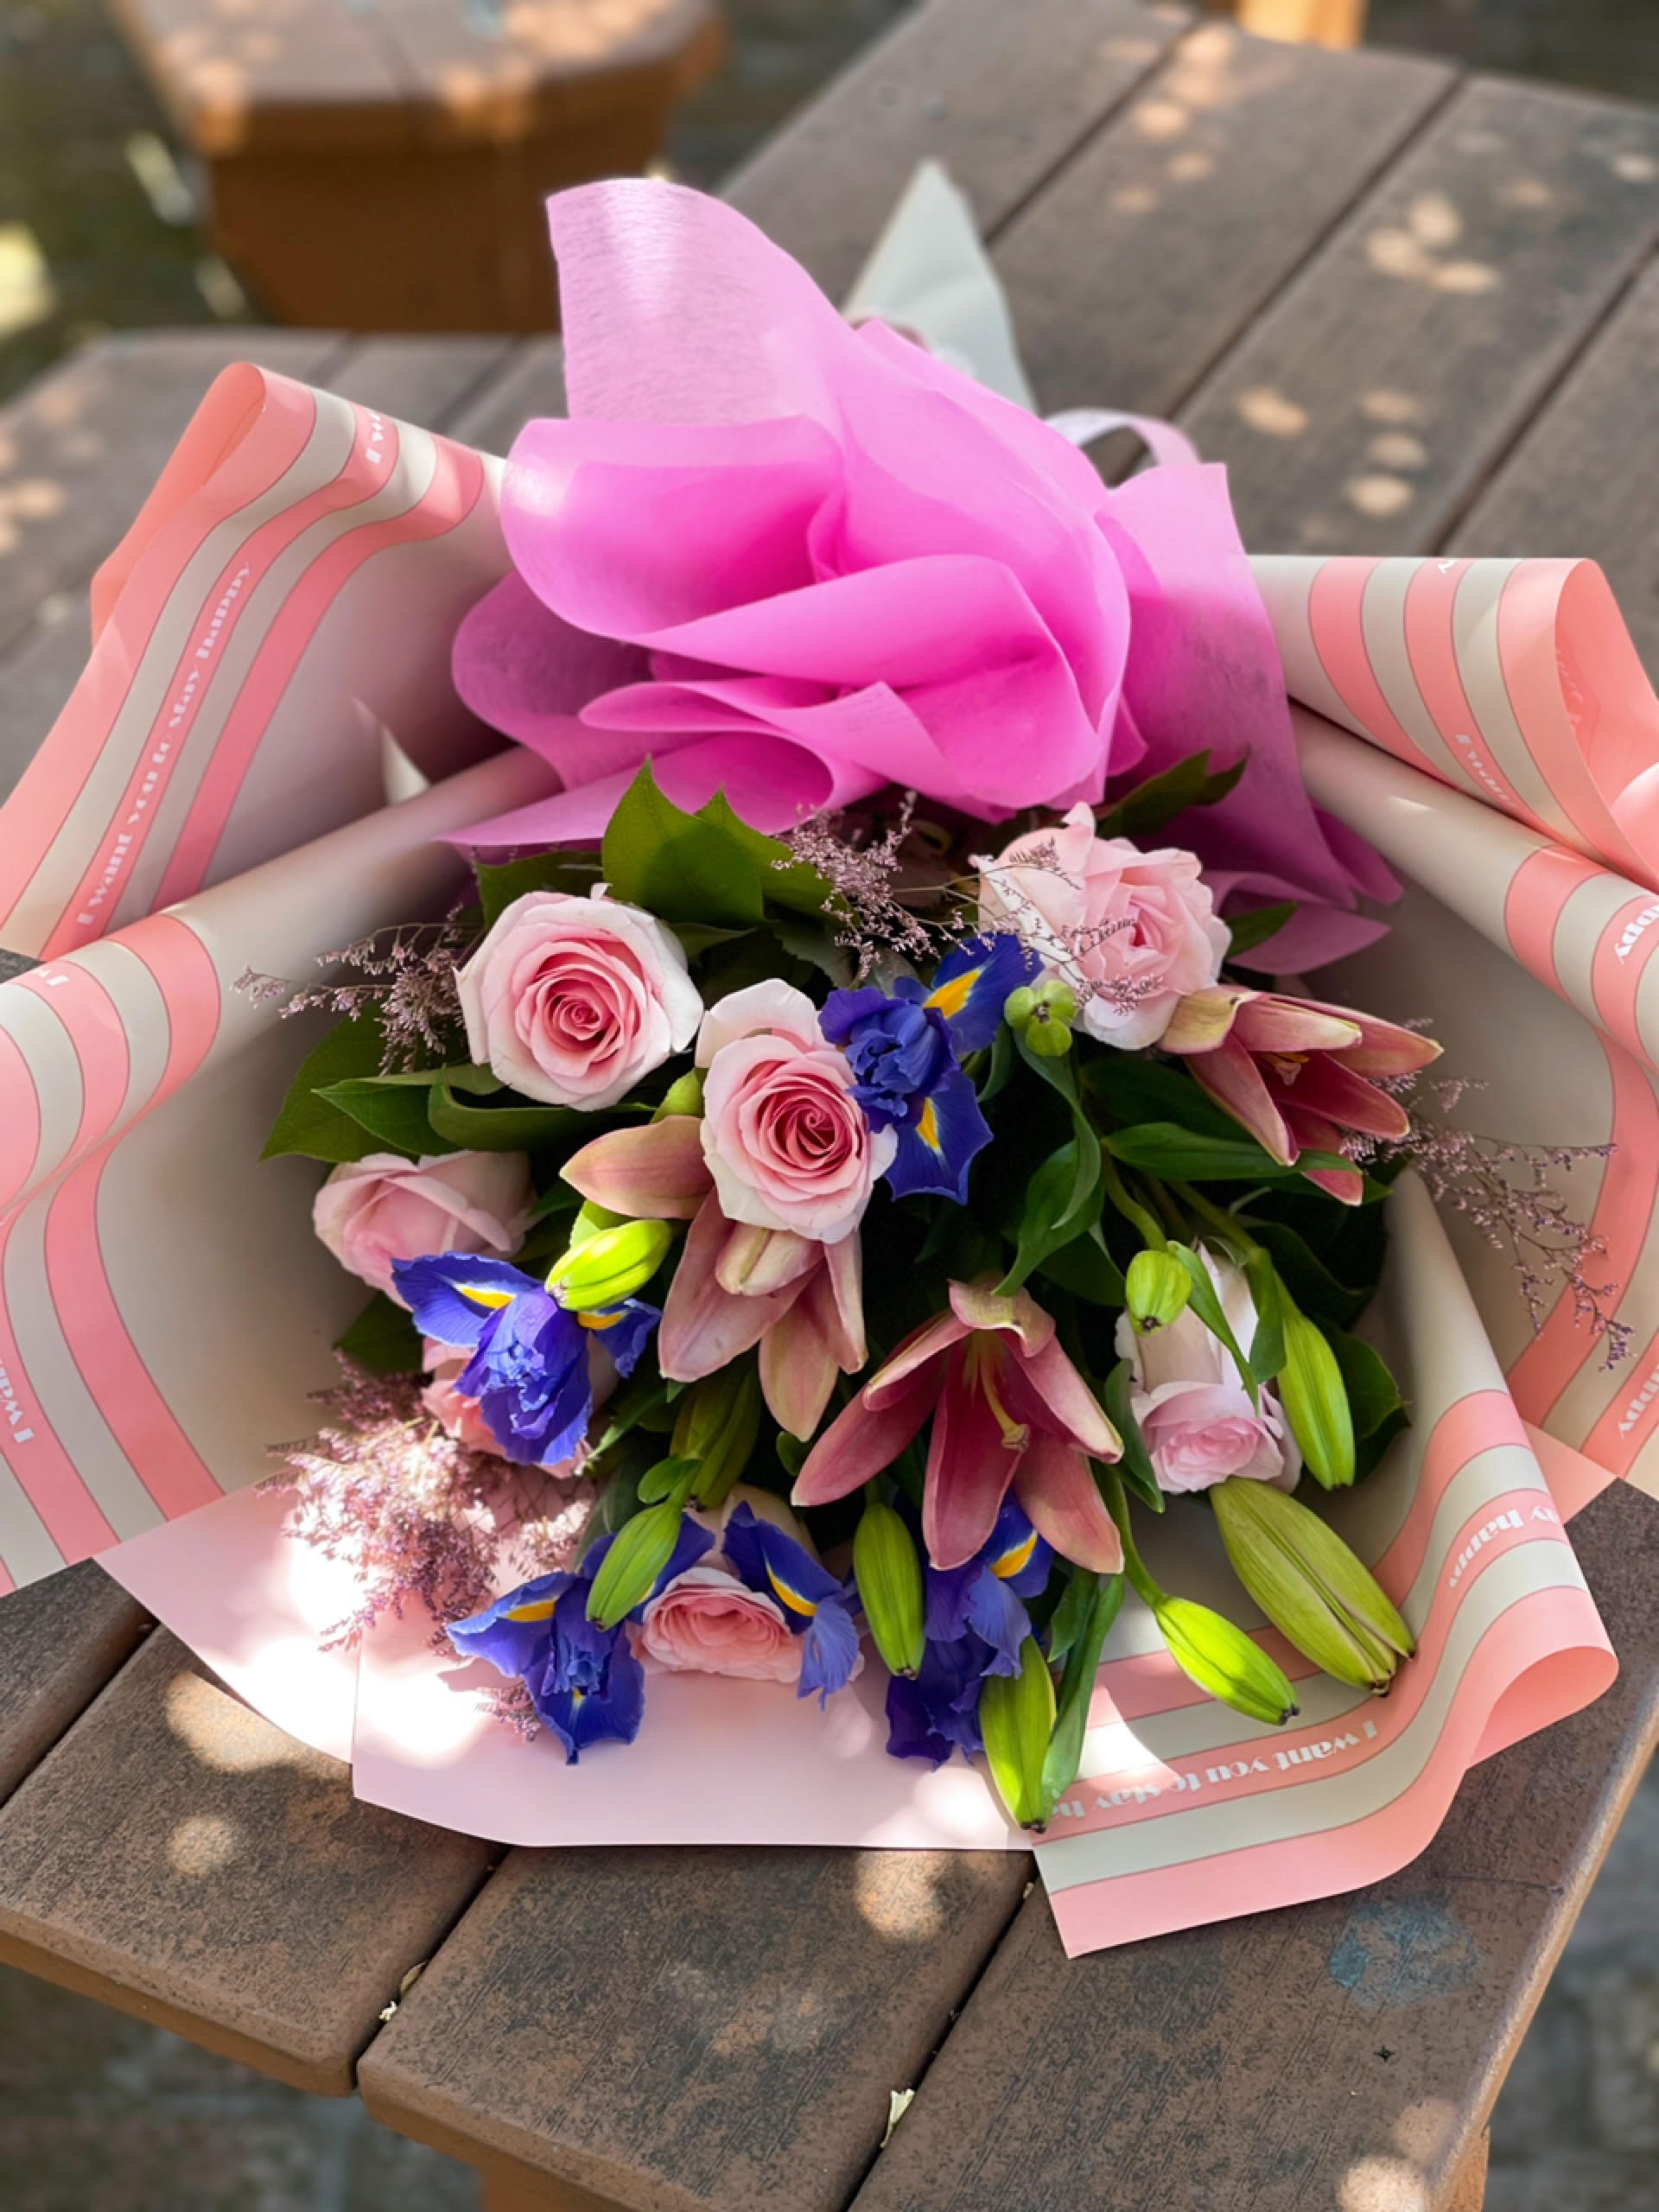 Grand Deluxe Flower Wrap - 100 Roses in Pink